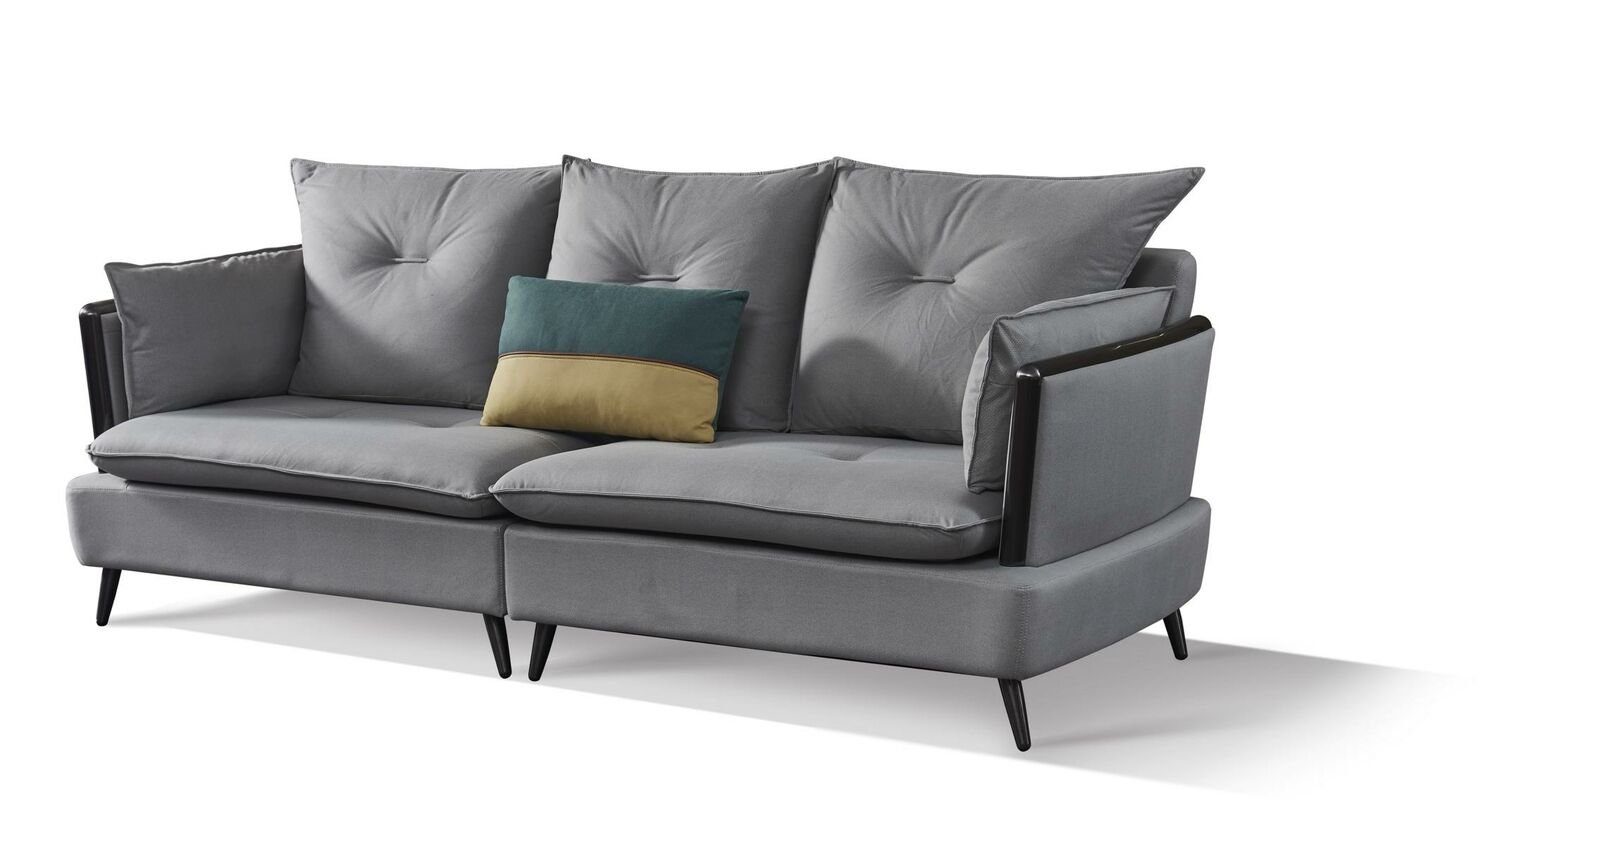 JVmoebel Sofa Sofa 3 Sitzer Textil Sofas Couch Polster Moderne Couchen, Made in Europe